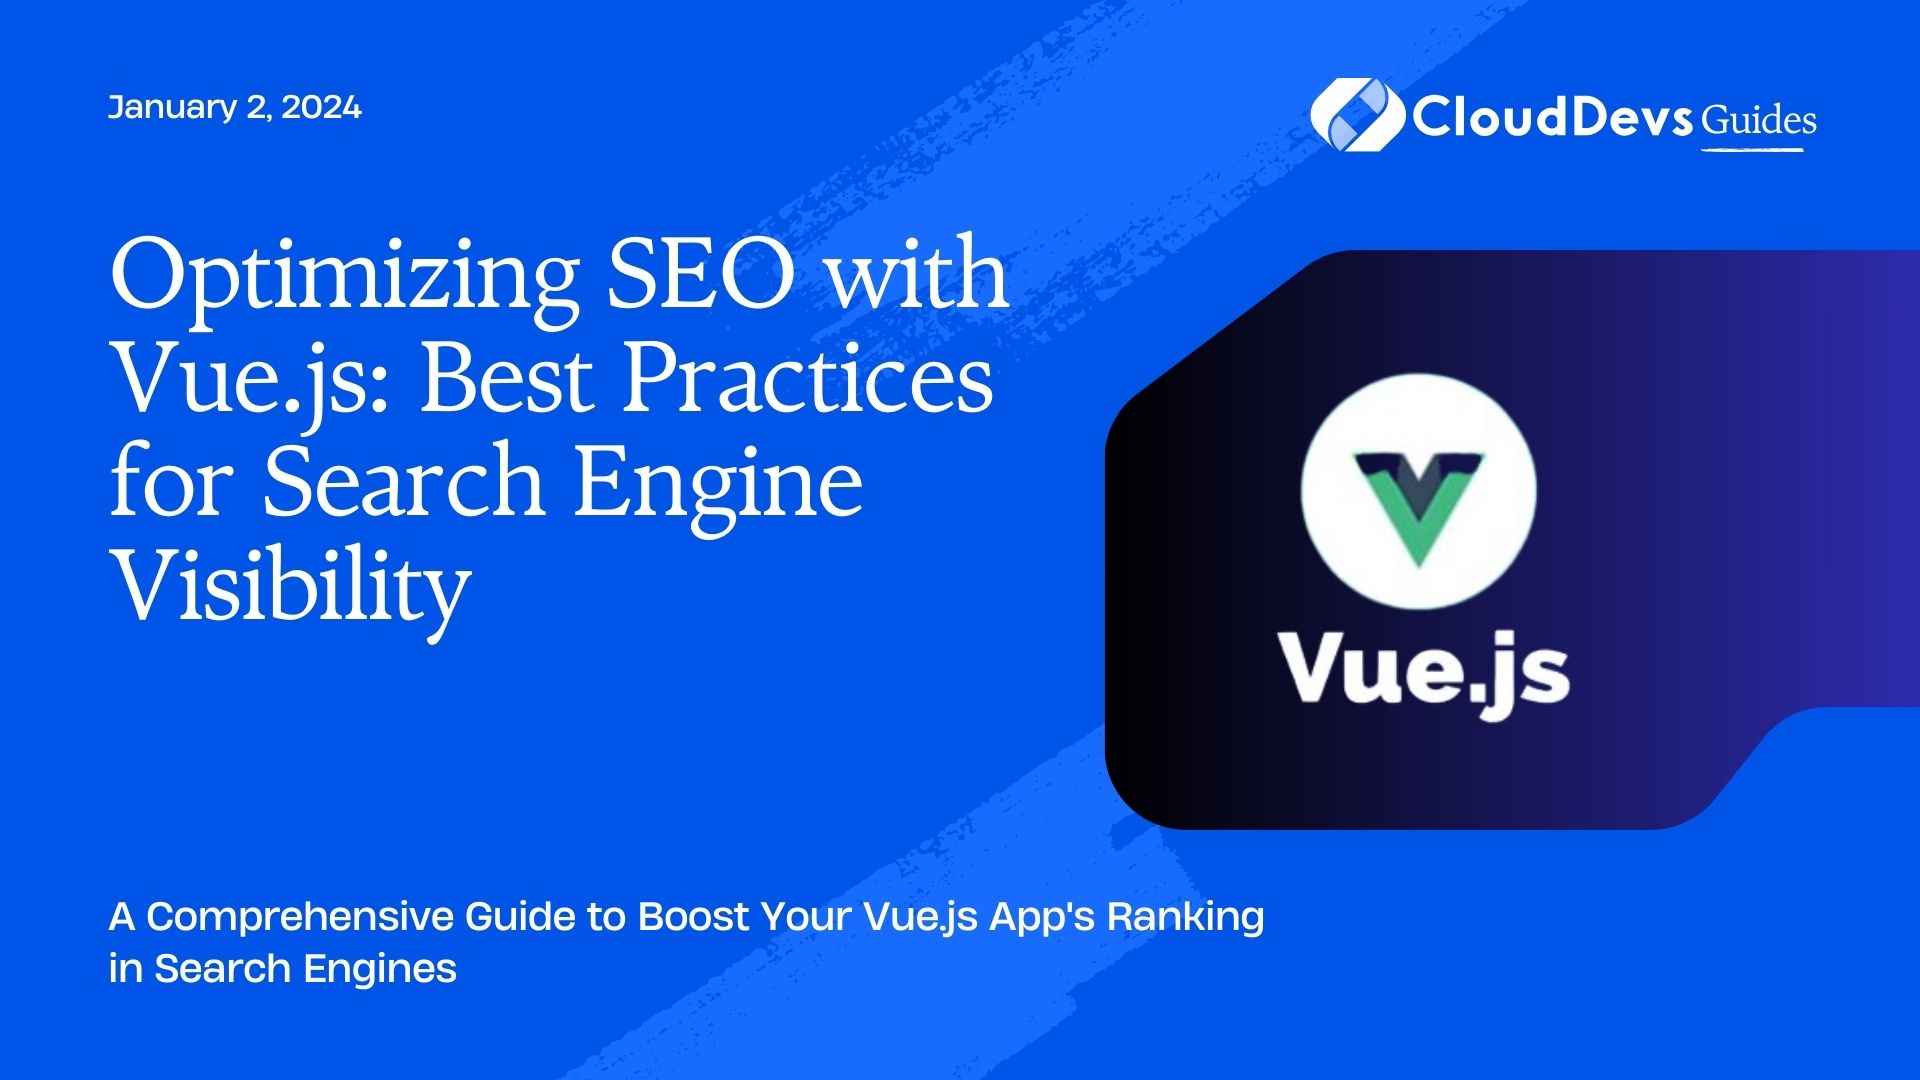 Optimizing SEO with Vue.js: Best Practices for Search Engine Visibility